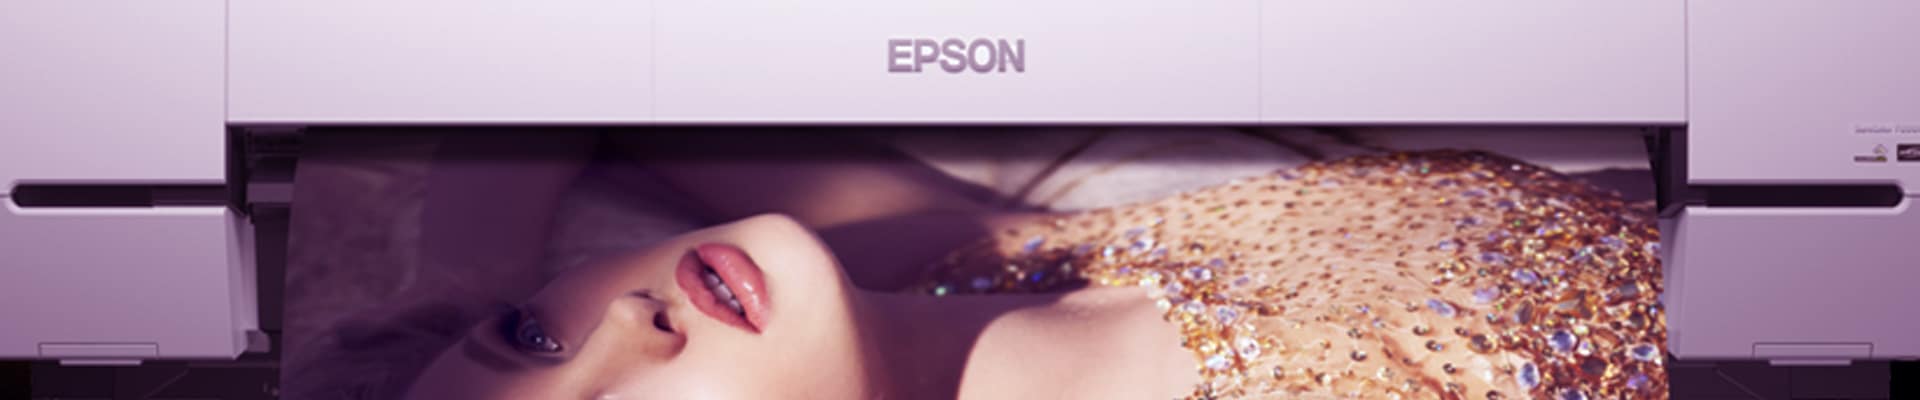 EPSON WIDE FORMAT Printers